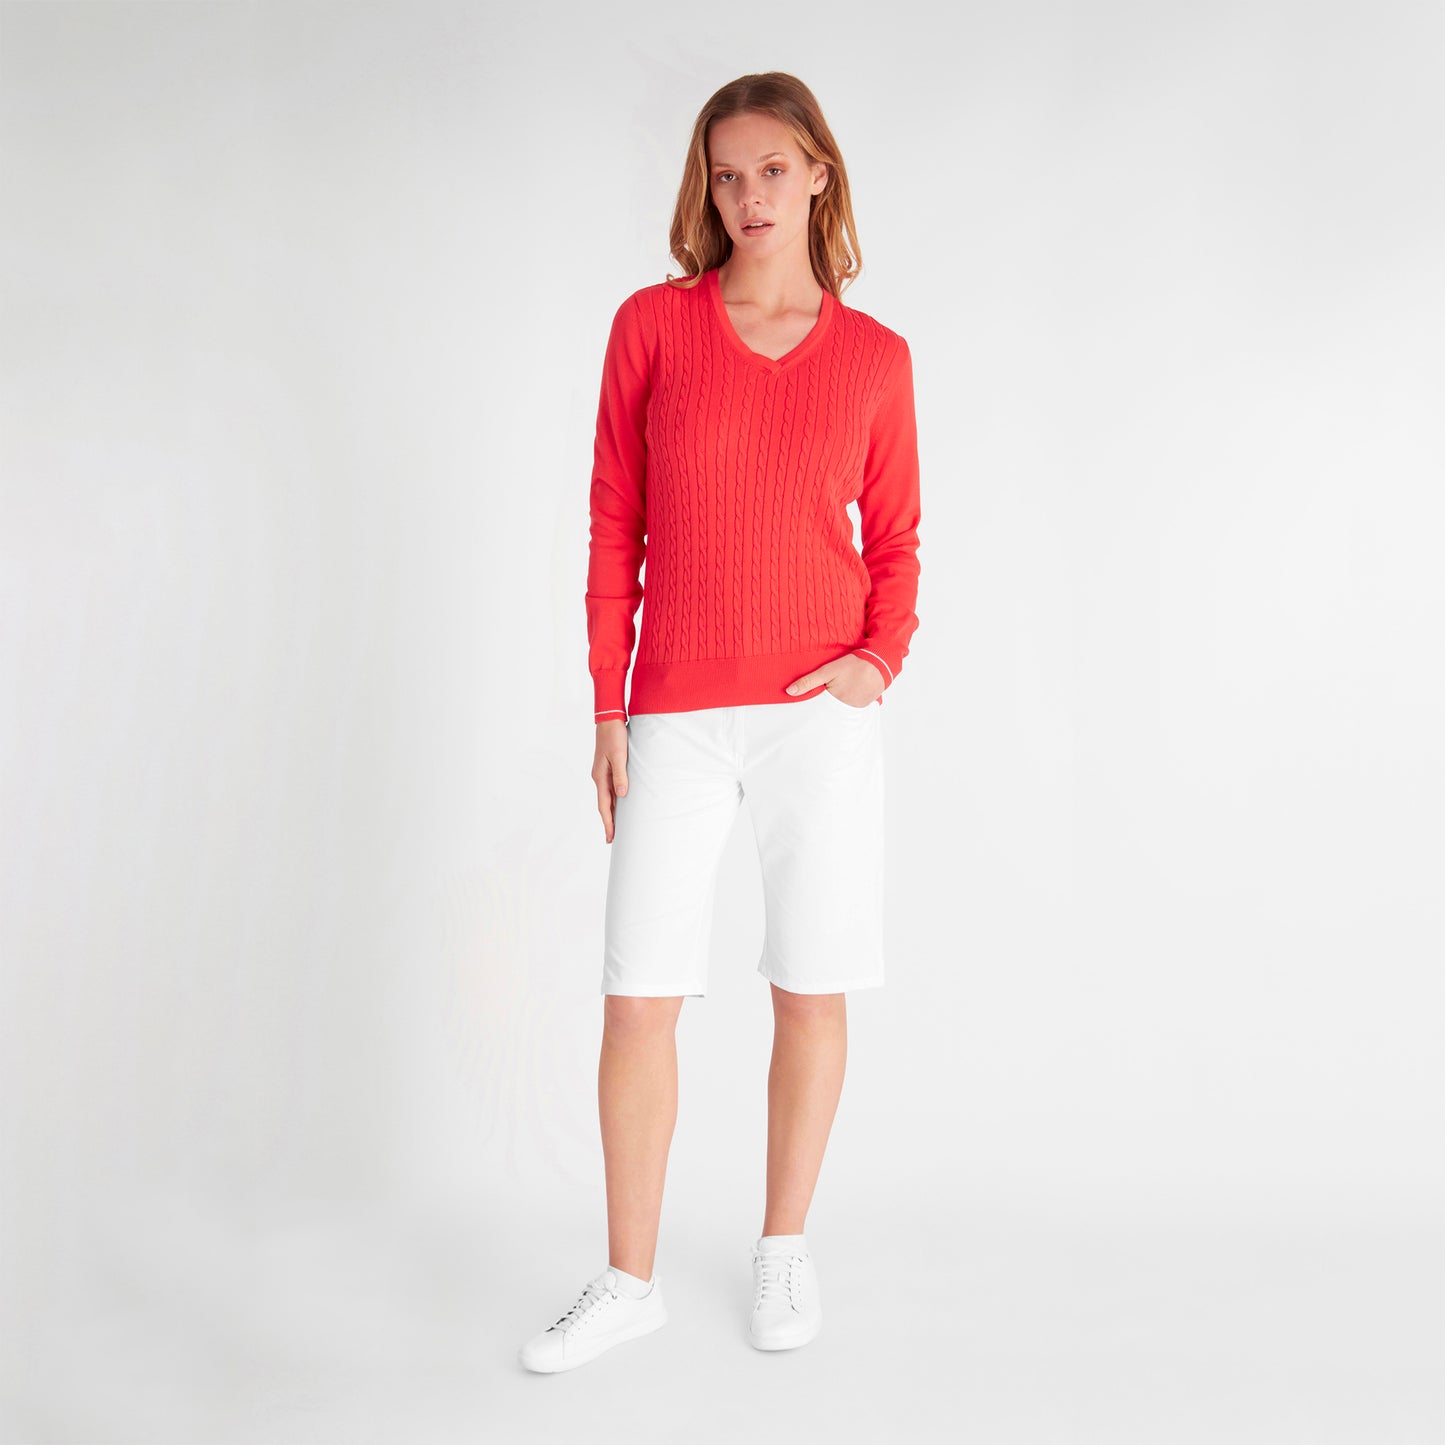 Green Lamb Ladies Cable Knit V-Neck Sweater in Poppy